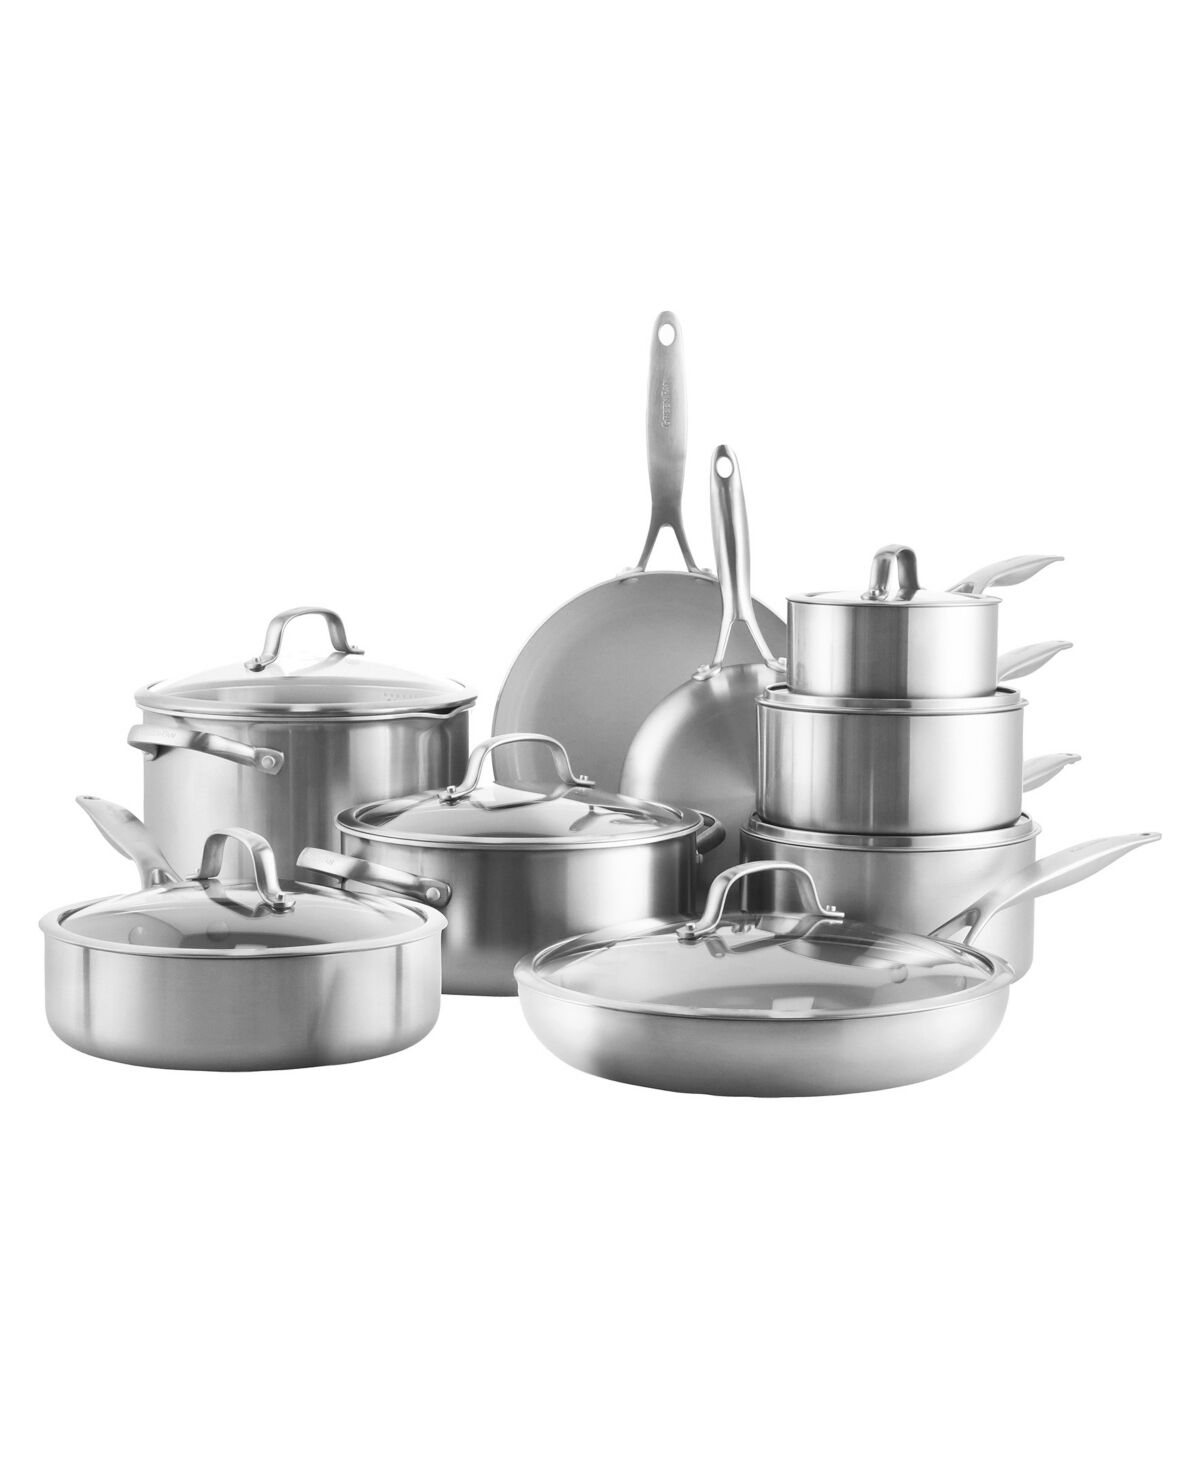 GreenPan Venice Pro Tri-Ply Stainless Steel Healthy Ceramic Nonstick 16 Piece Cookware Pots and Pans Set - Stainless Steel